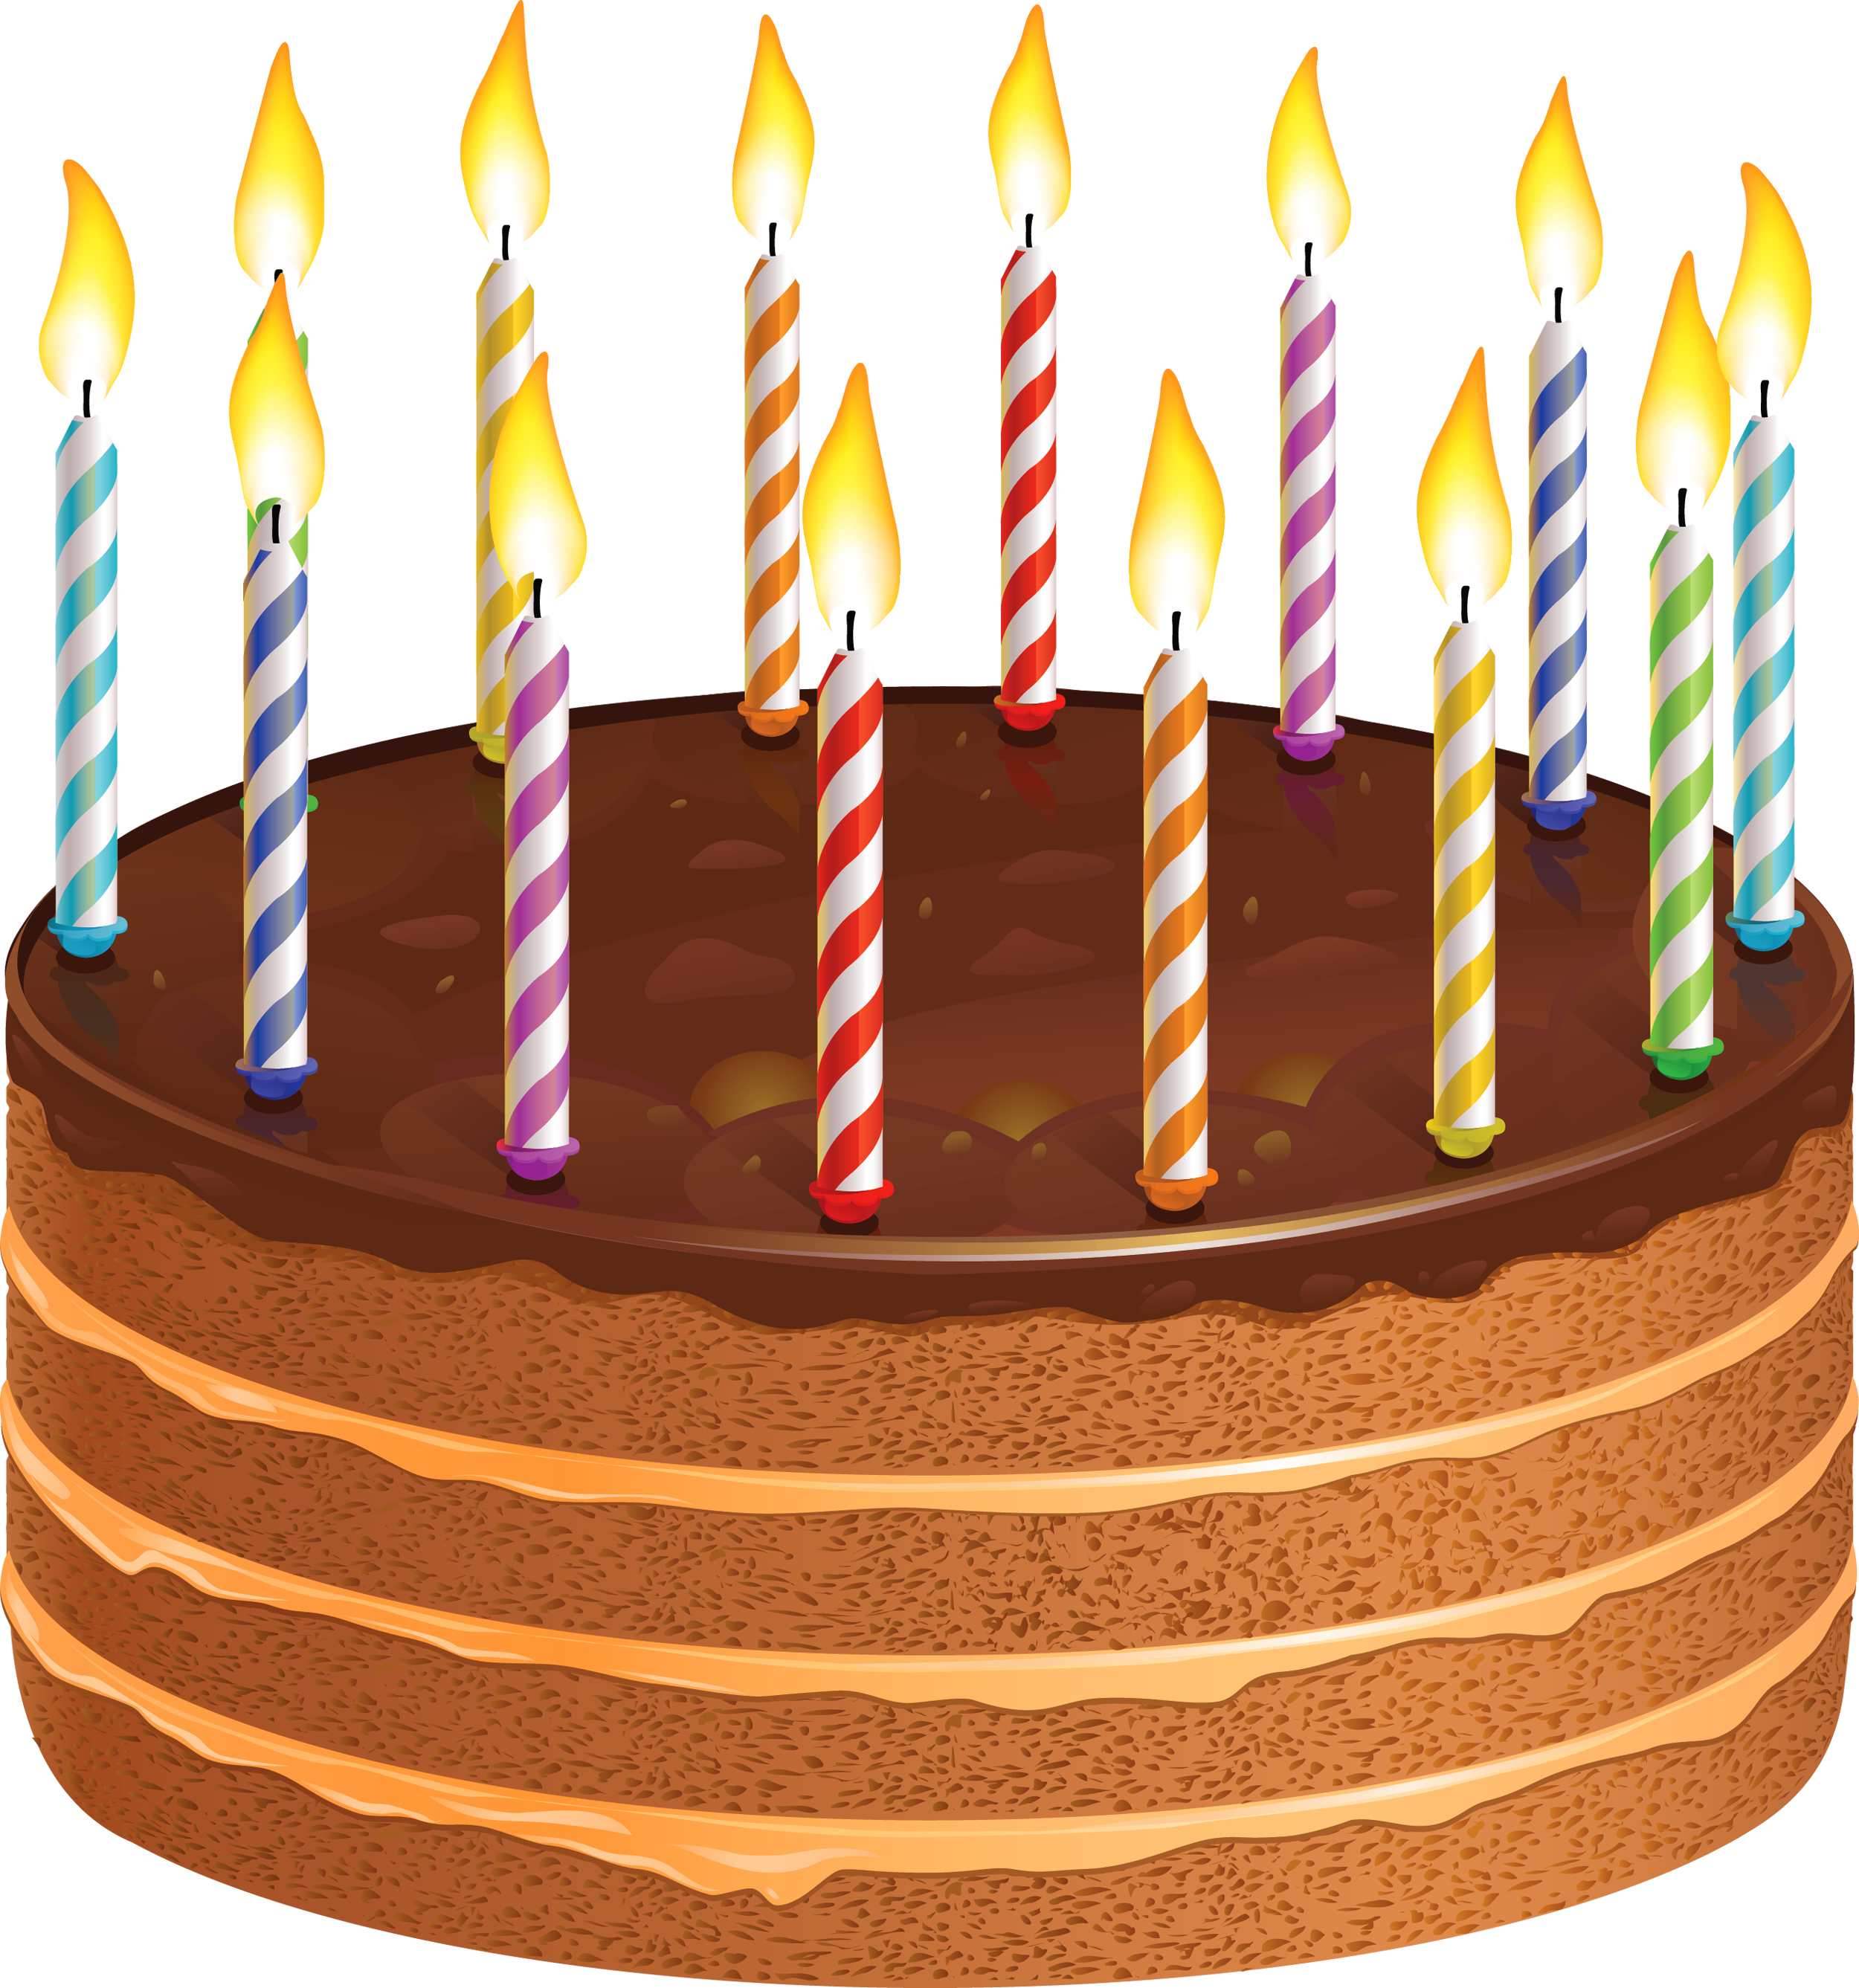 Download Chocolate Cake with Candles PNG Picture | Gallery ...